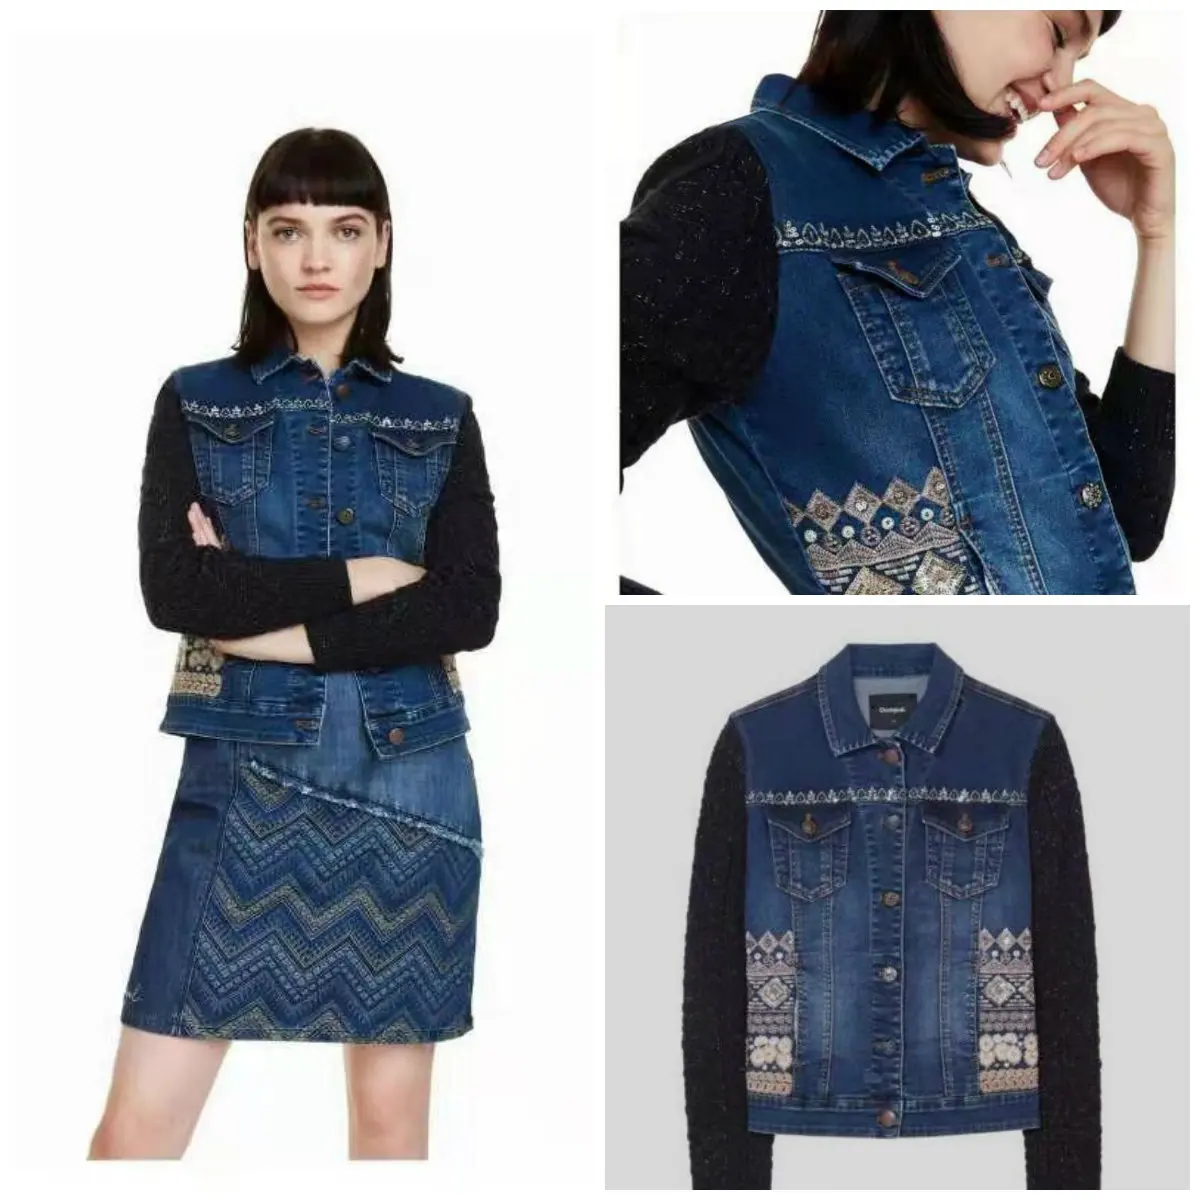 

Desigual, a Spanish fashion designer, is offering a new style of knitted and stitched denim jacket for spring and Autumn ladies